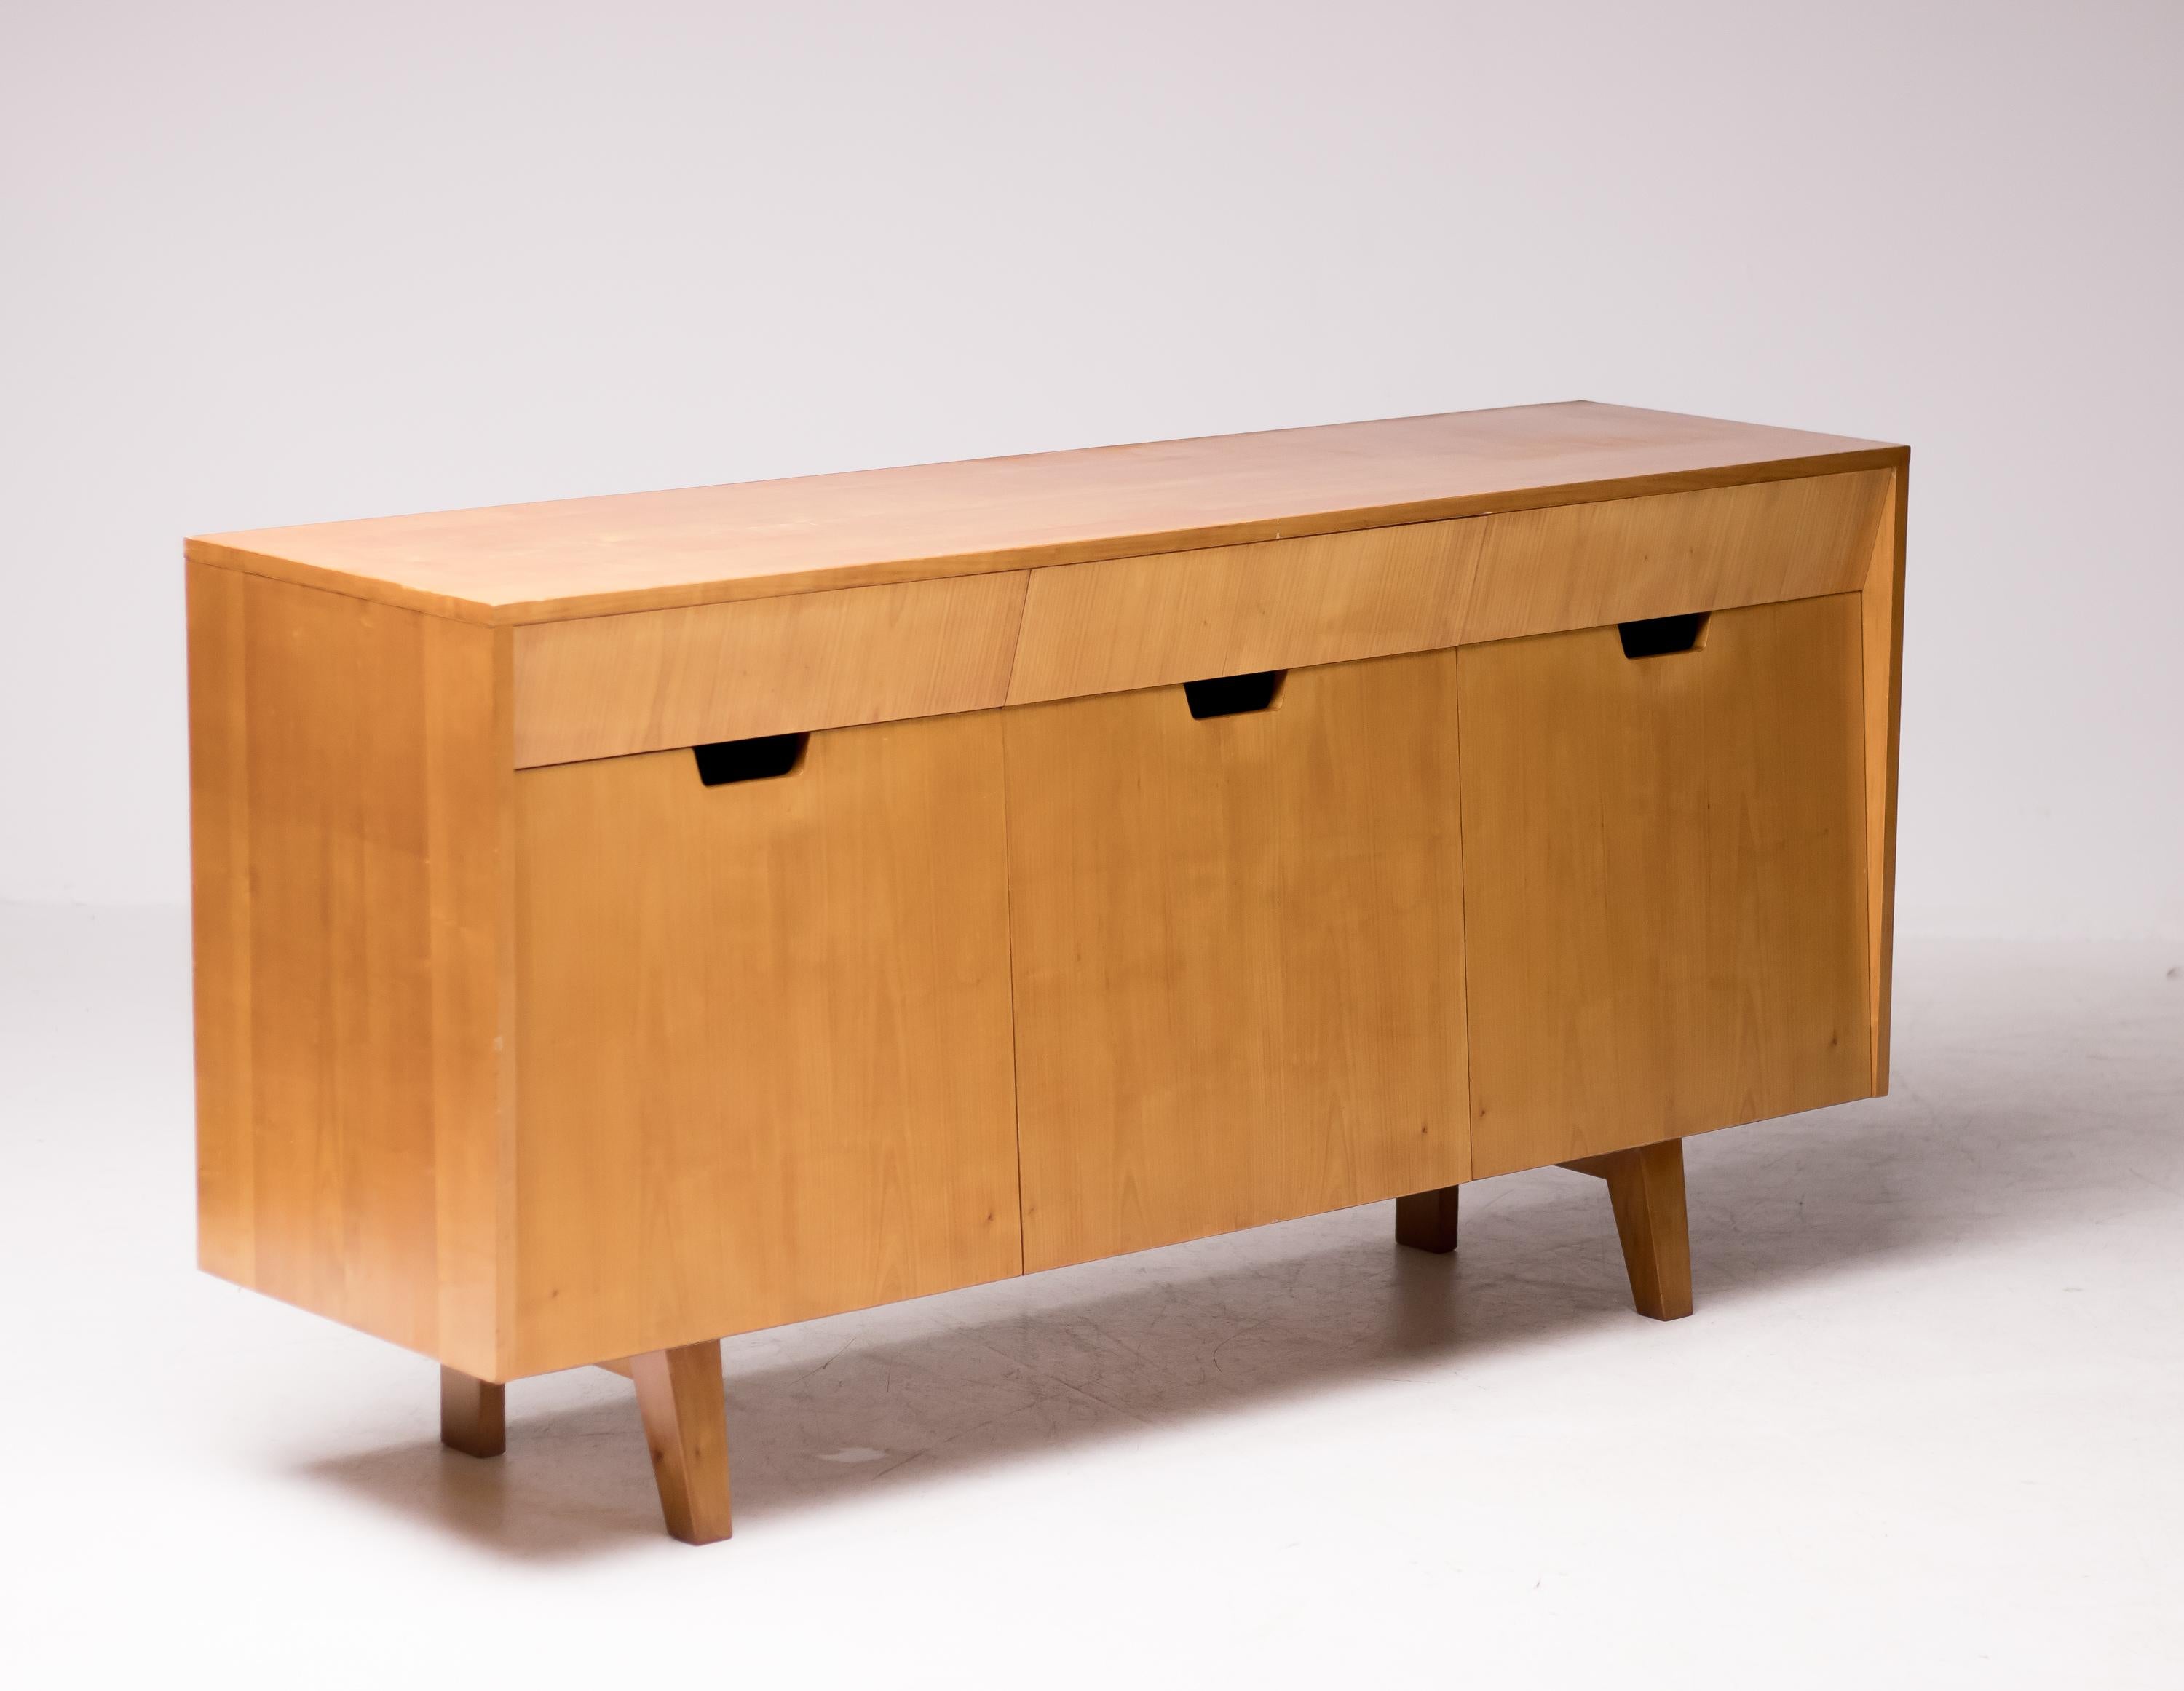 Beautiful Mid-Century Modern sideboard with smart Minimalist design making door and drawer handles superfluous.